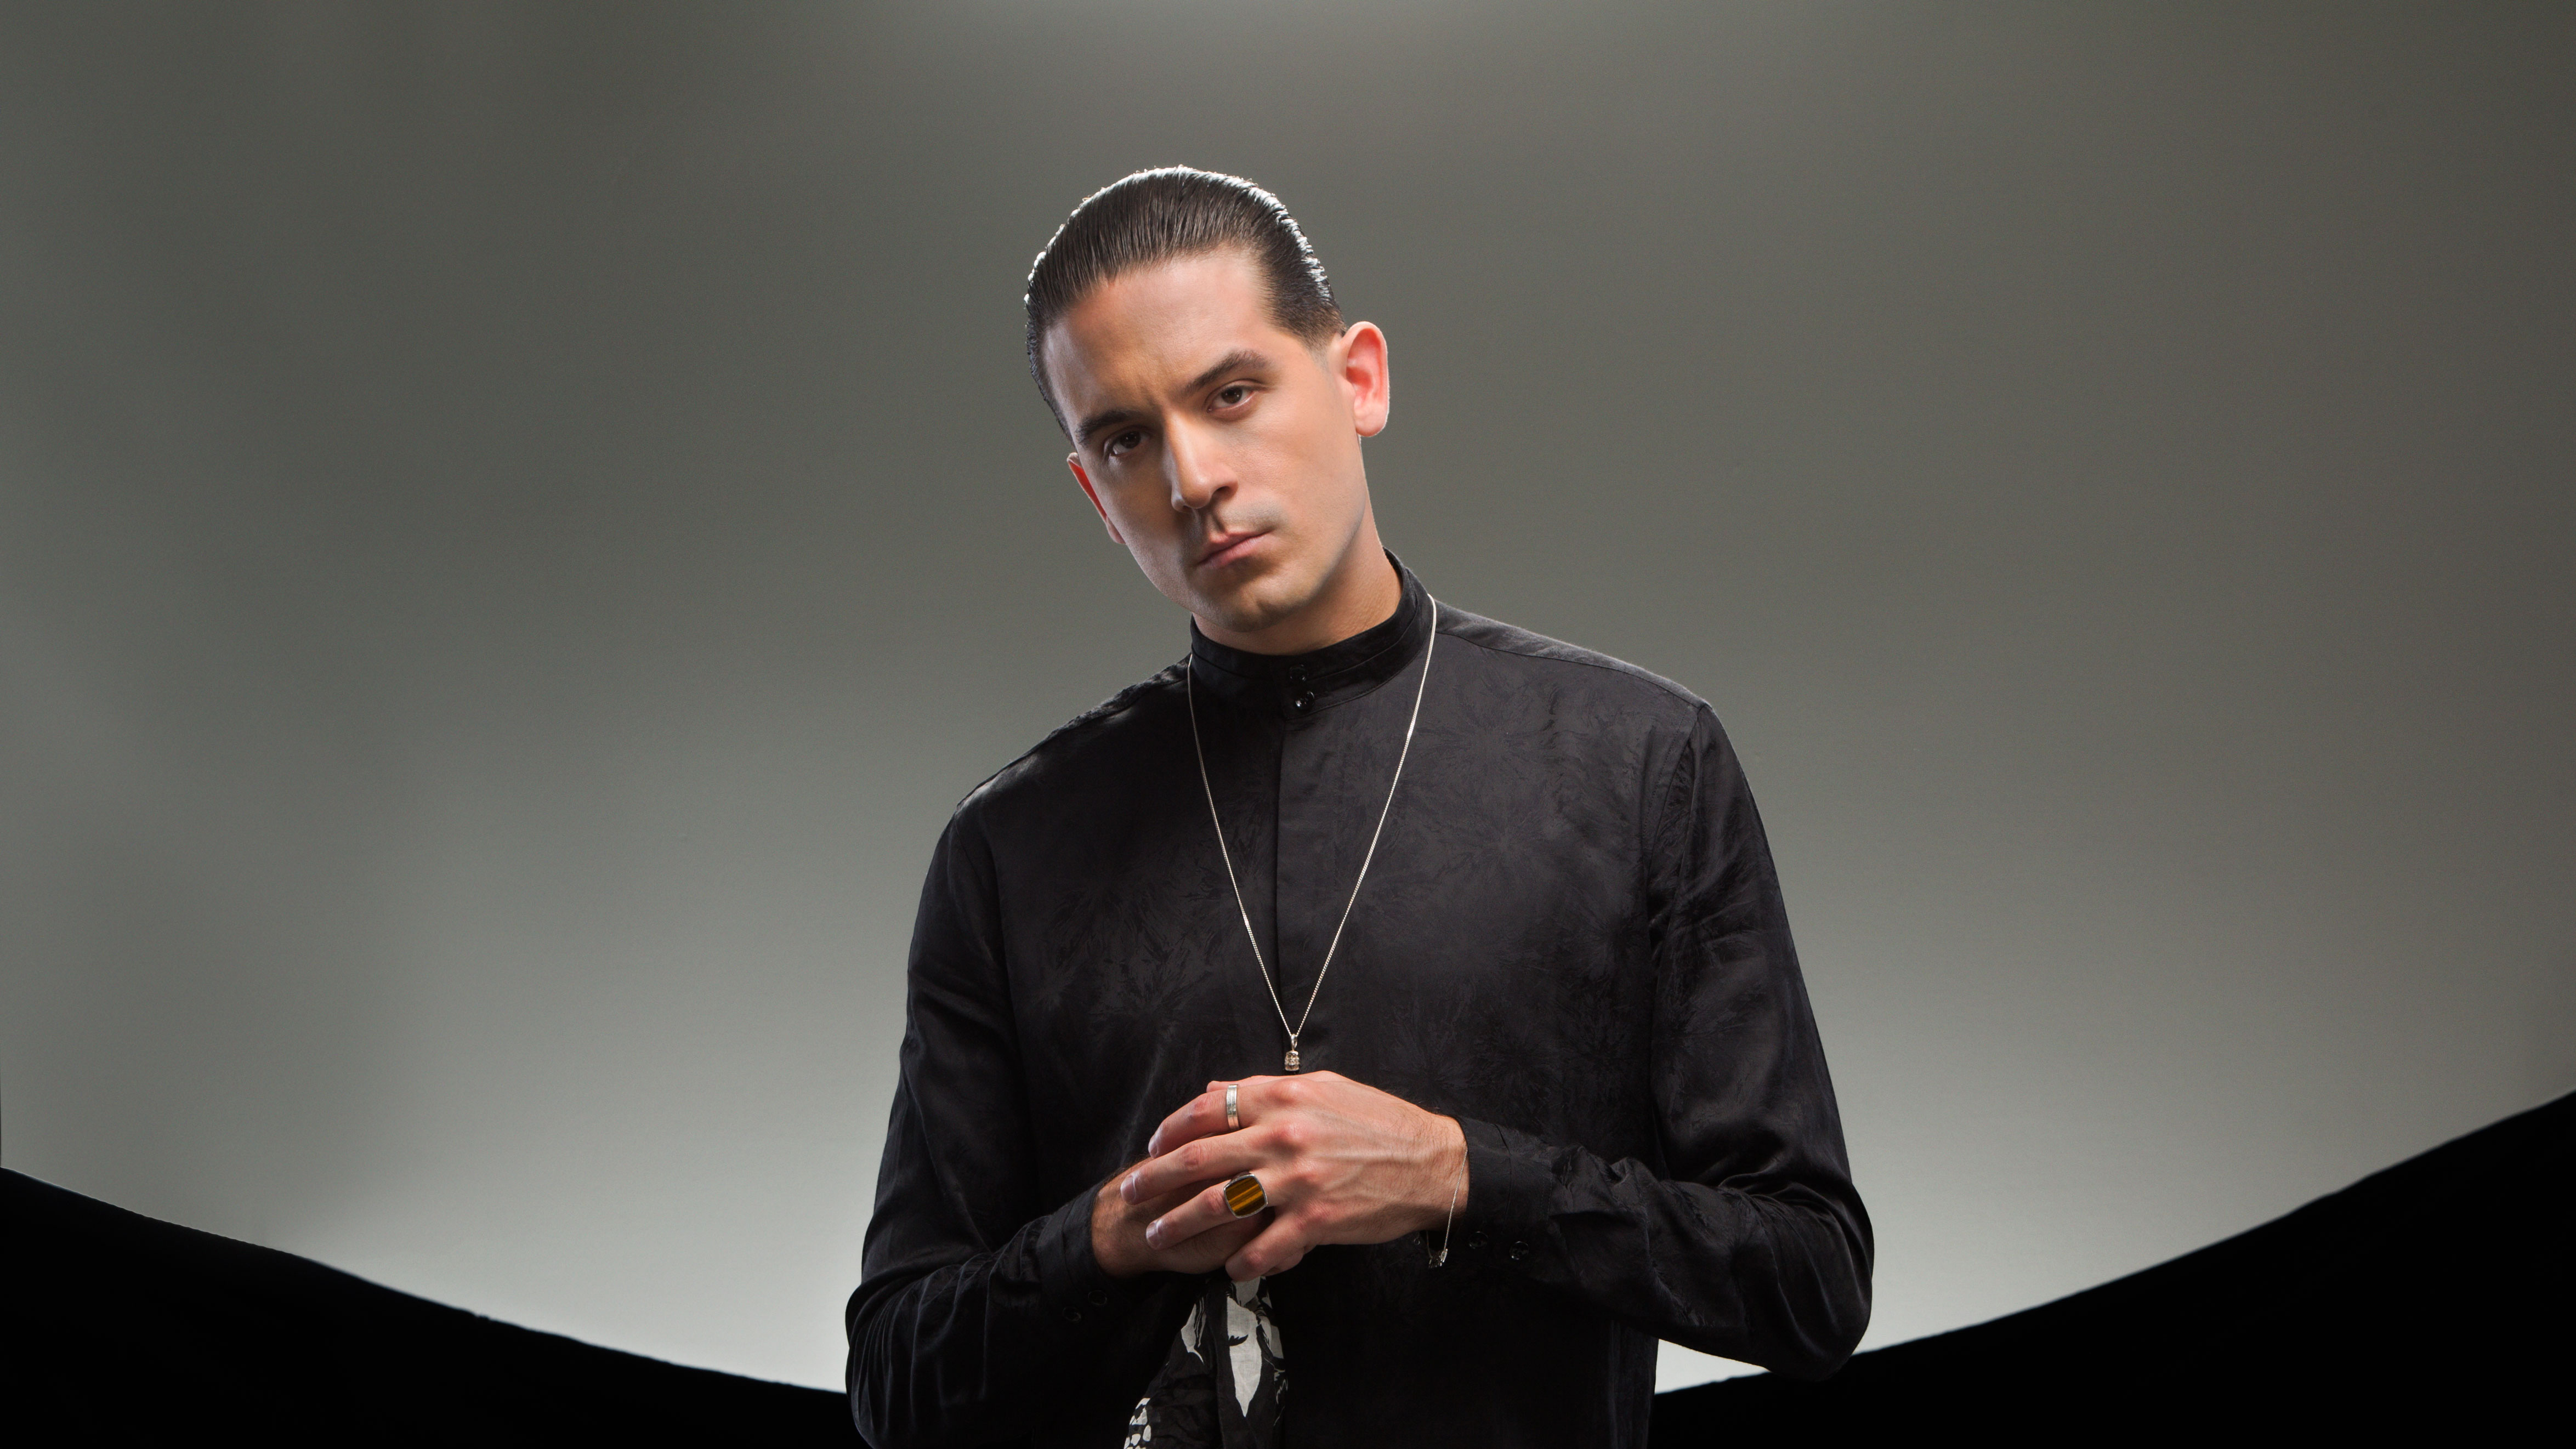 G Eazy - G Eazy 2018 , HD Wallpaper & Backgrounds